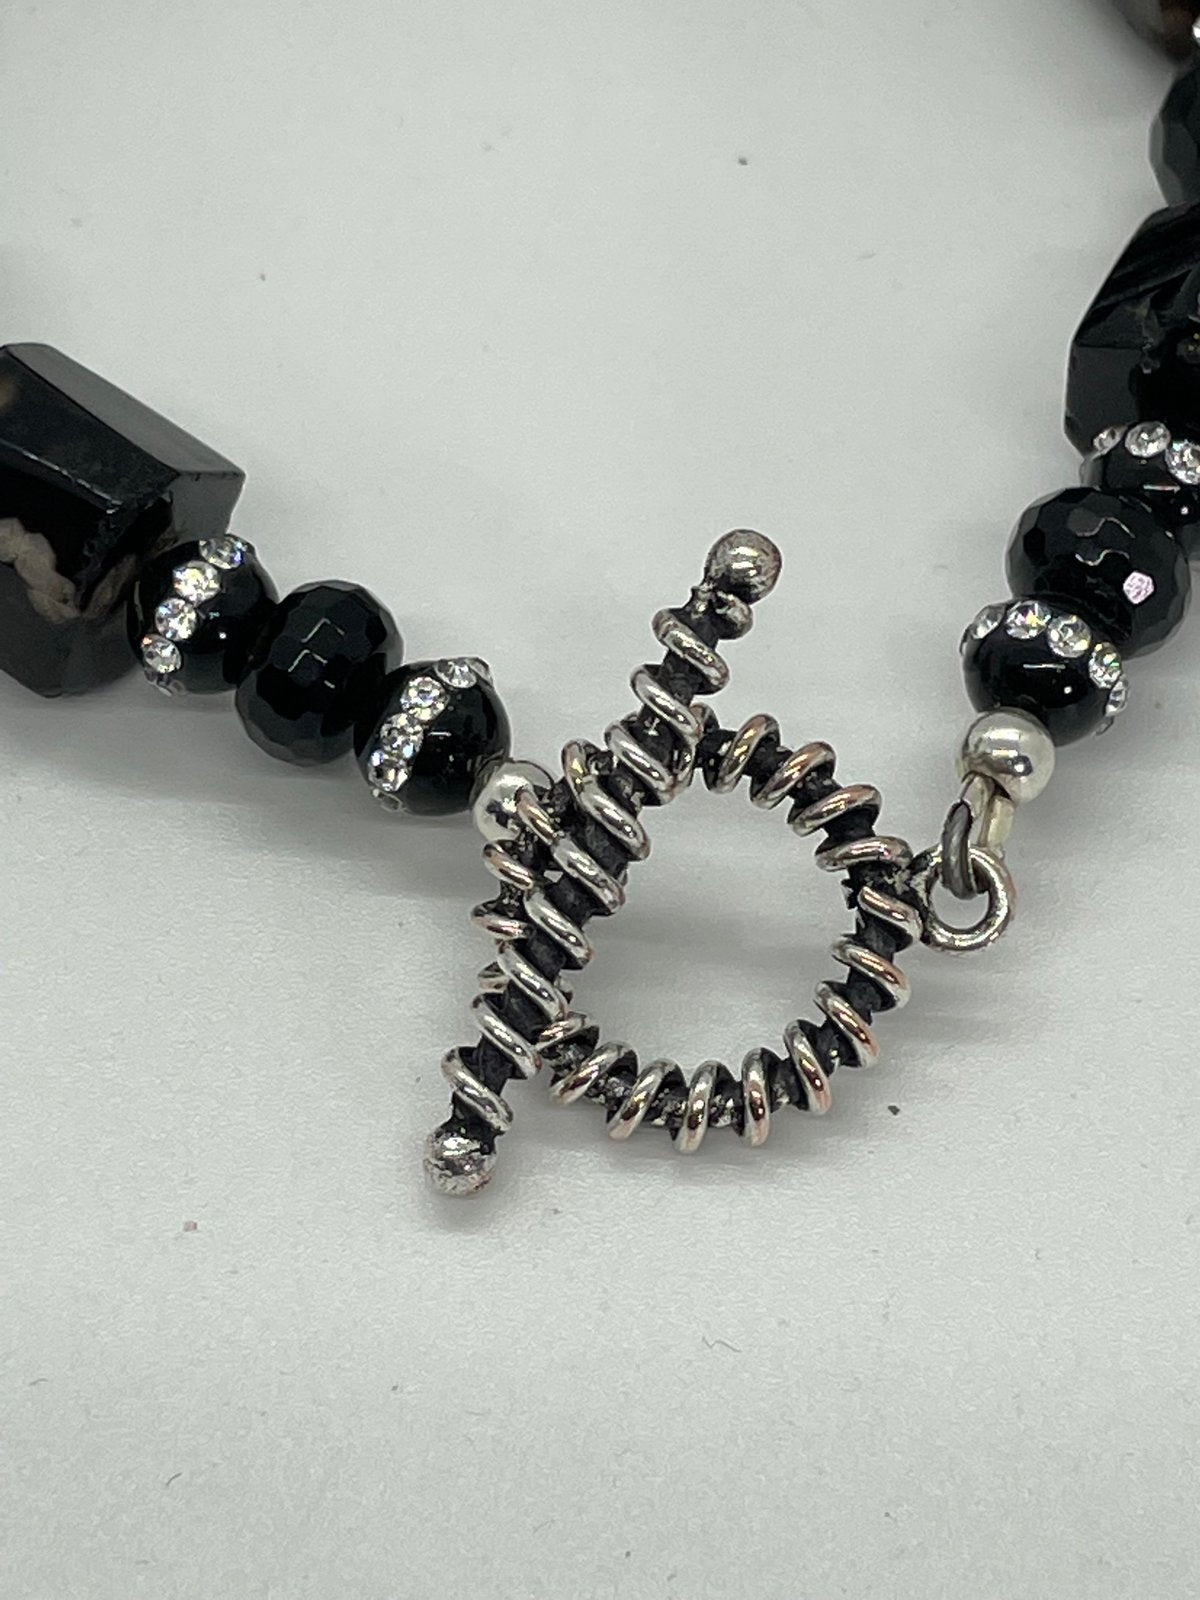 Onyx and agate chunky bracelet with encrusted onyx.